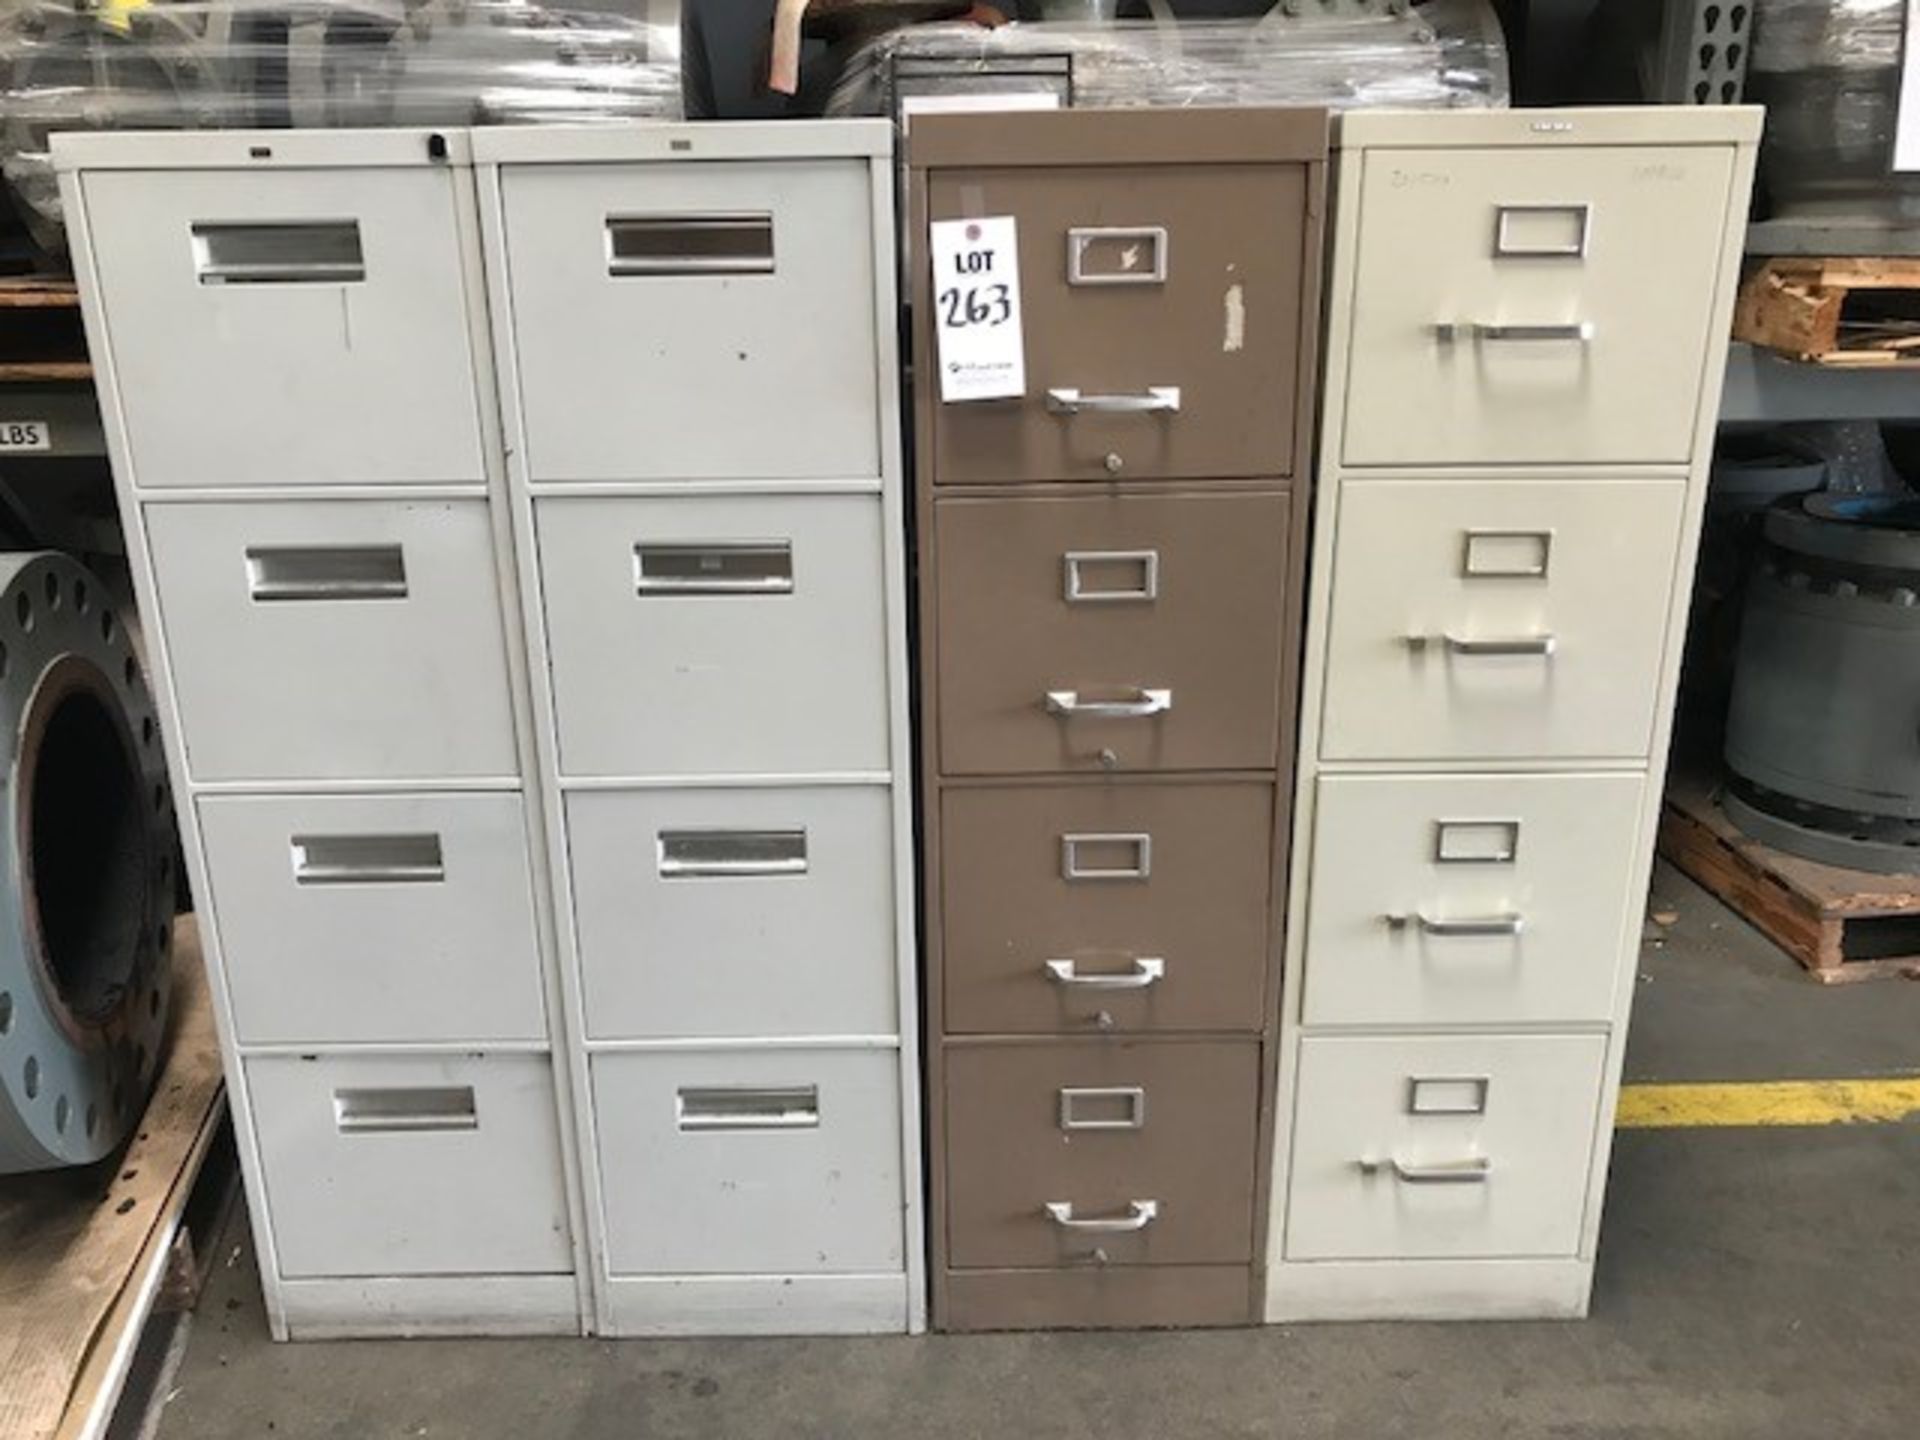 (4) FILE CABINETS WITH NO LOCK